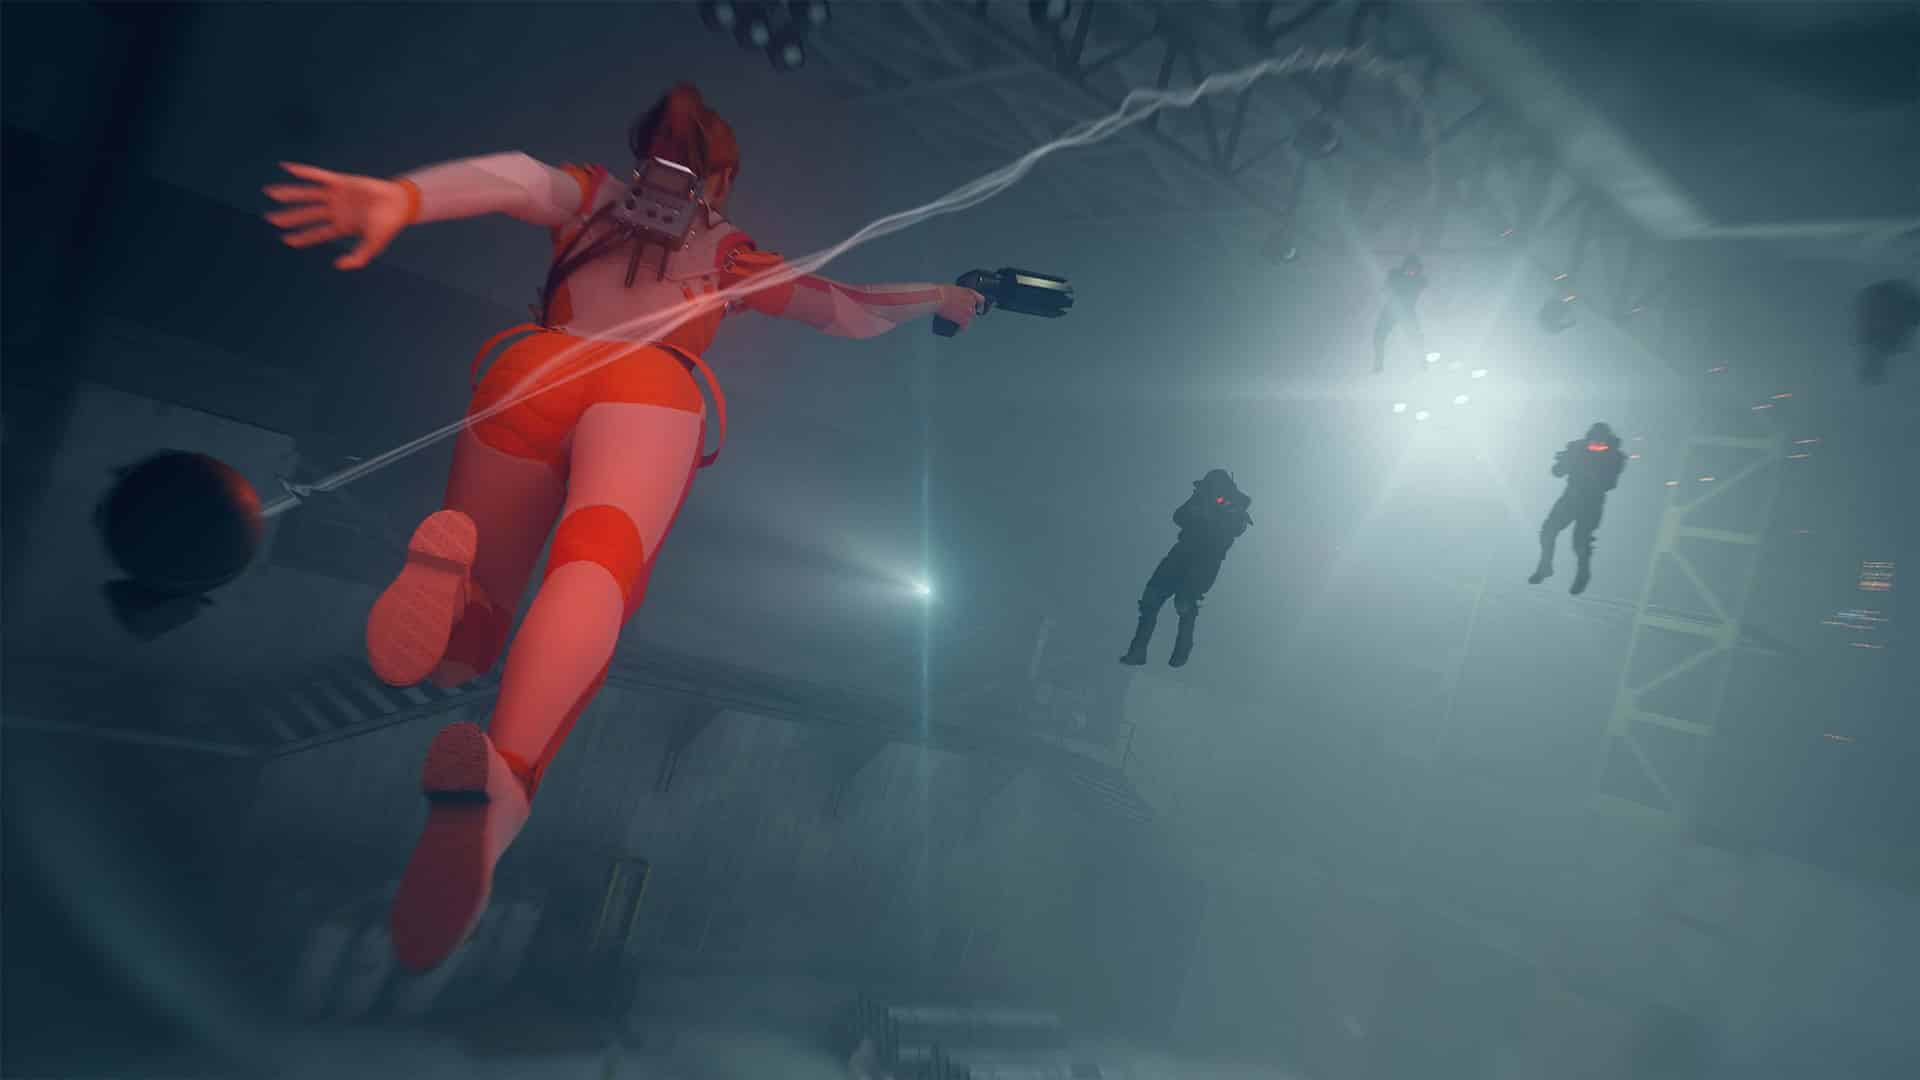 Remedy Entertainment Control: AWE Alan Wake expansion DLC embraces survival horror to great effect for the Remedy Connected Universe